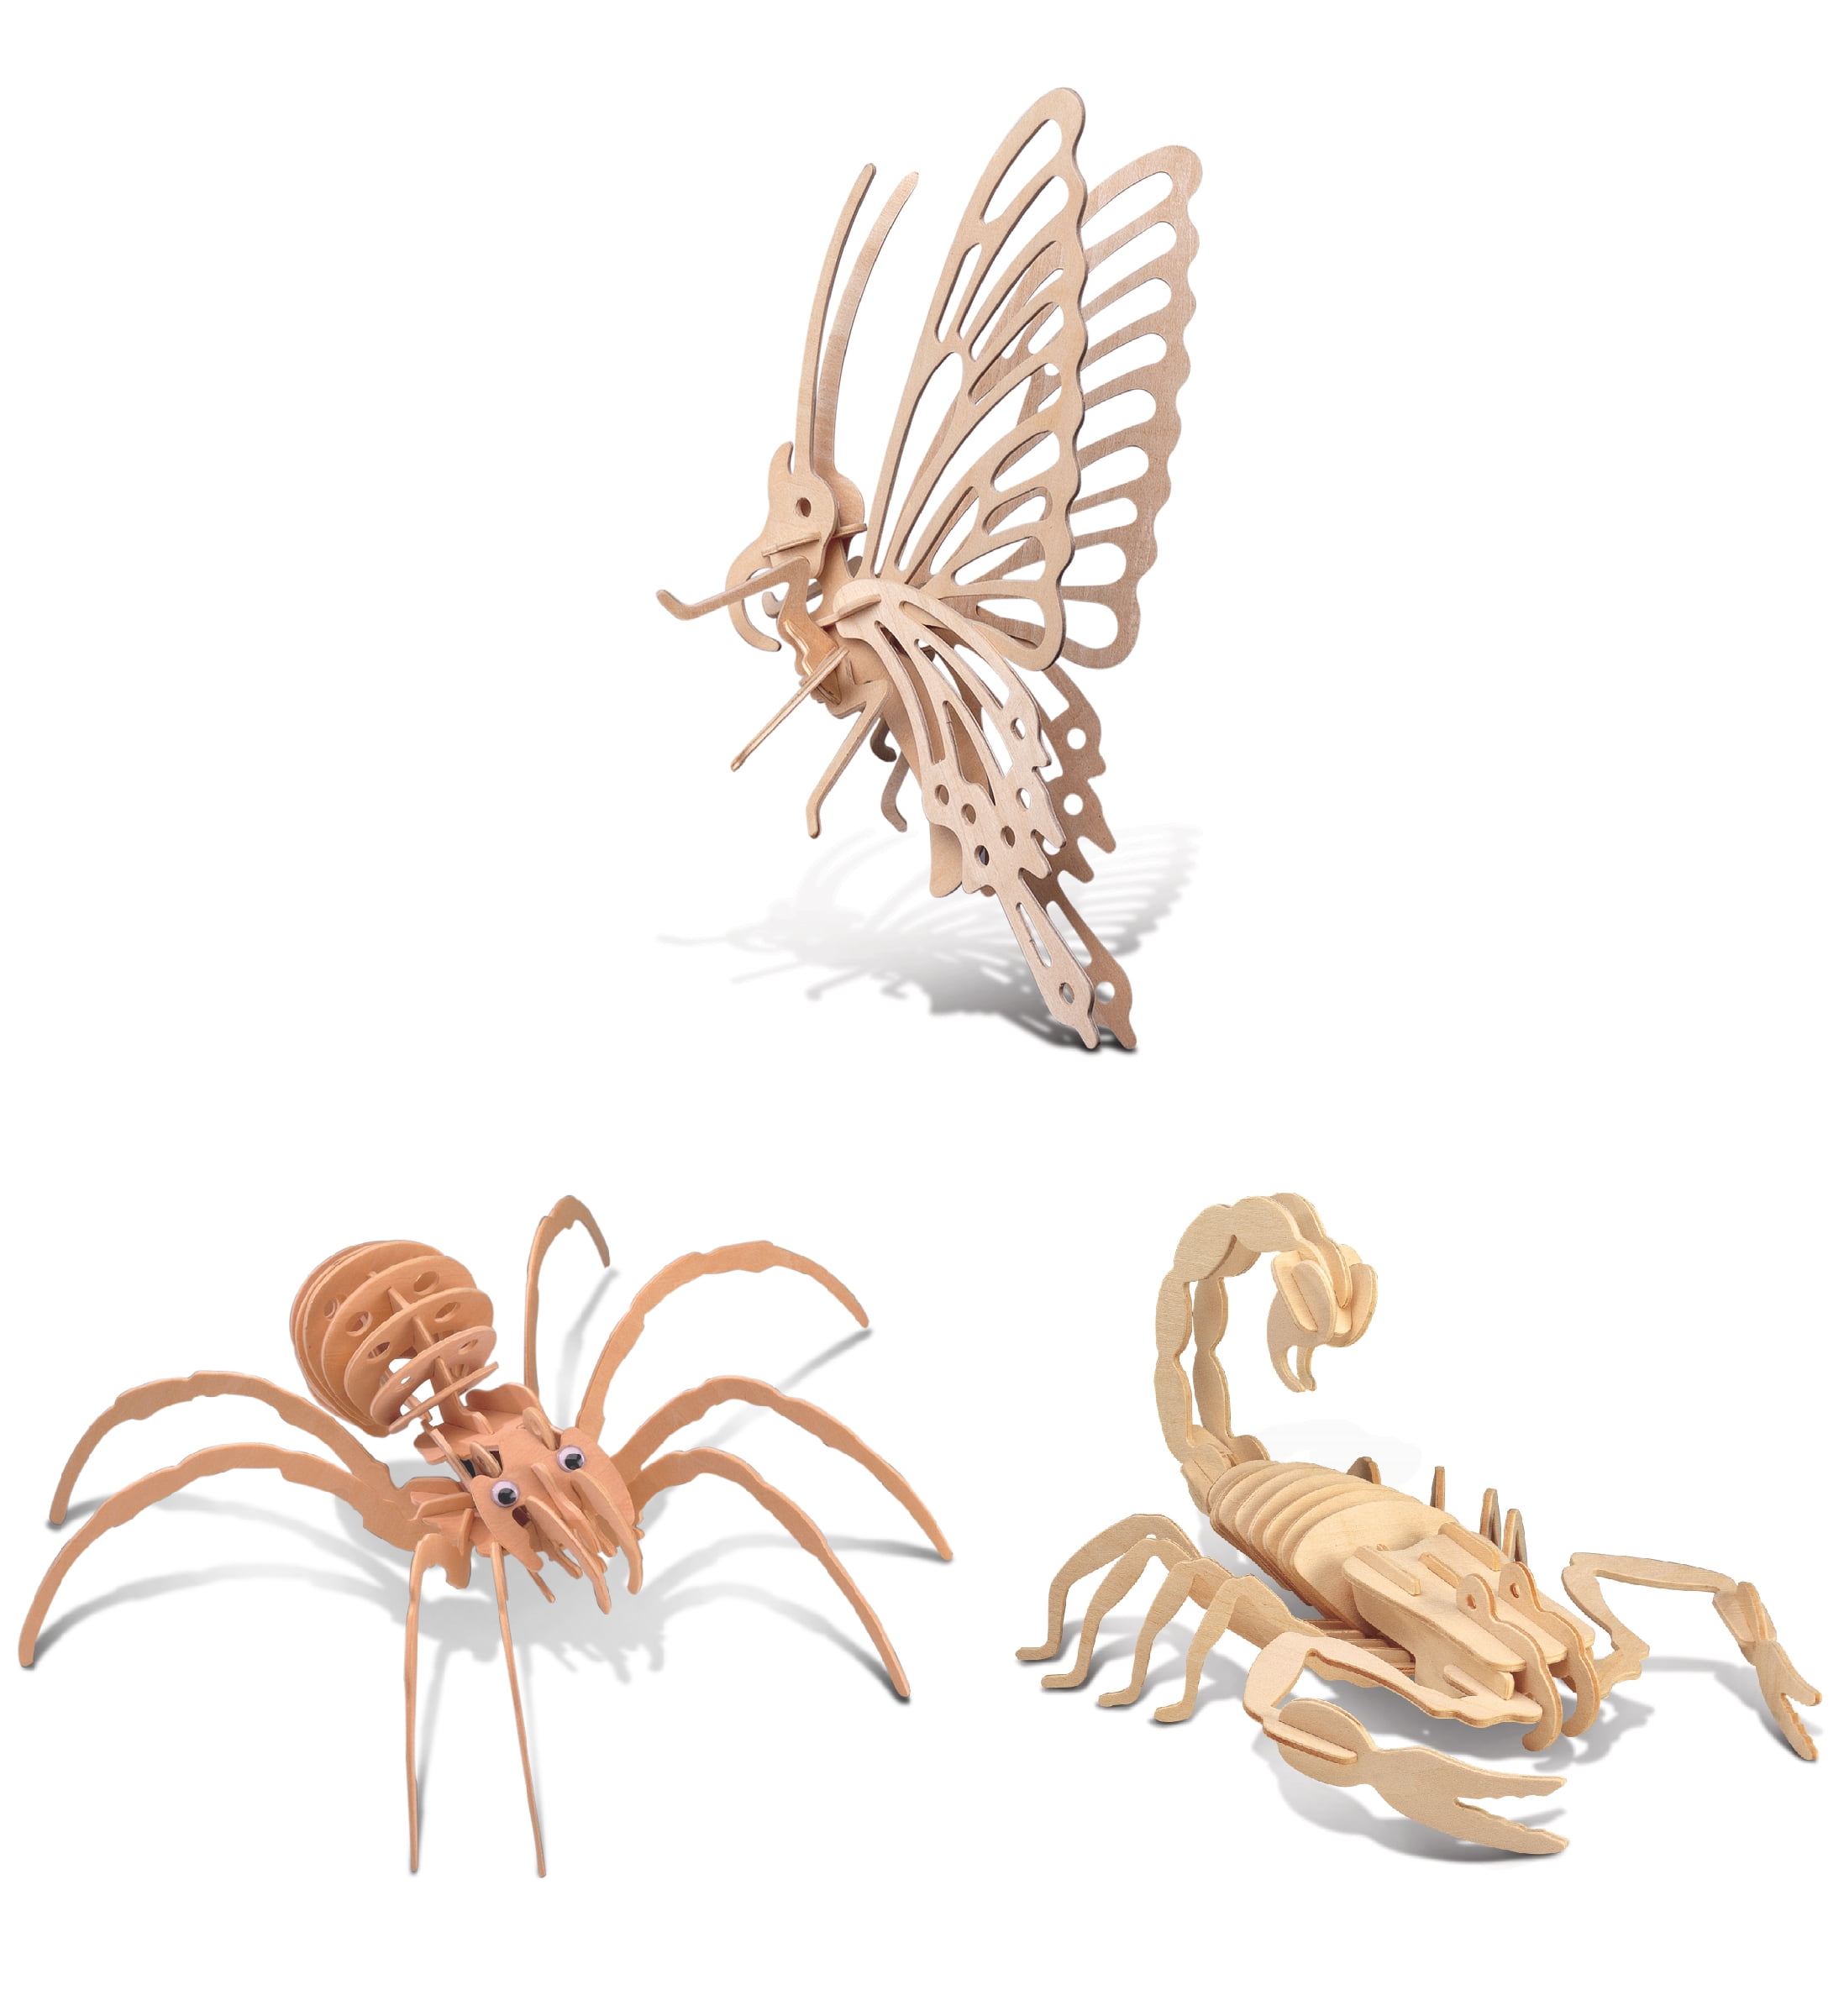 SWAN OR SCORPION MODEL KIT 3D WOODEN PUZZLES 